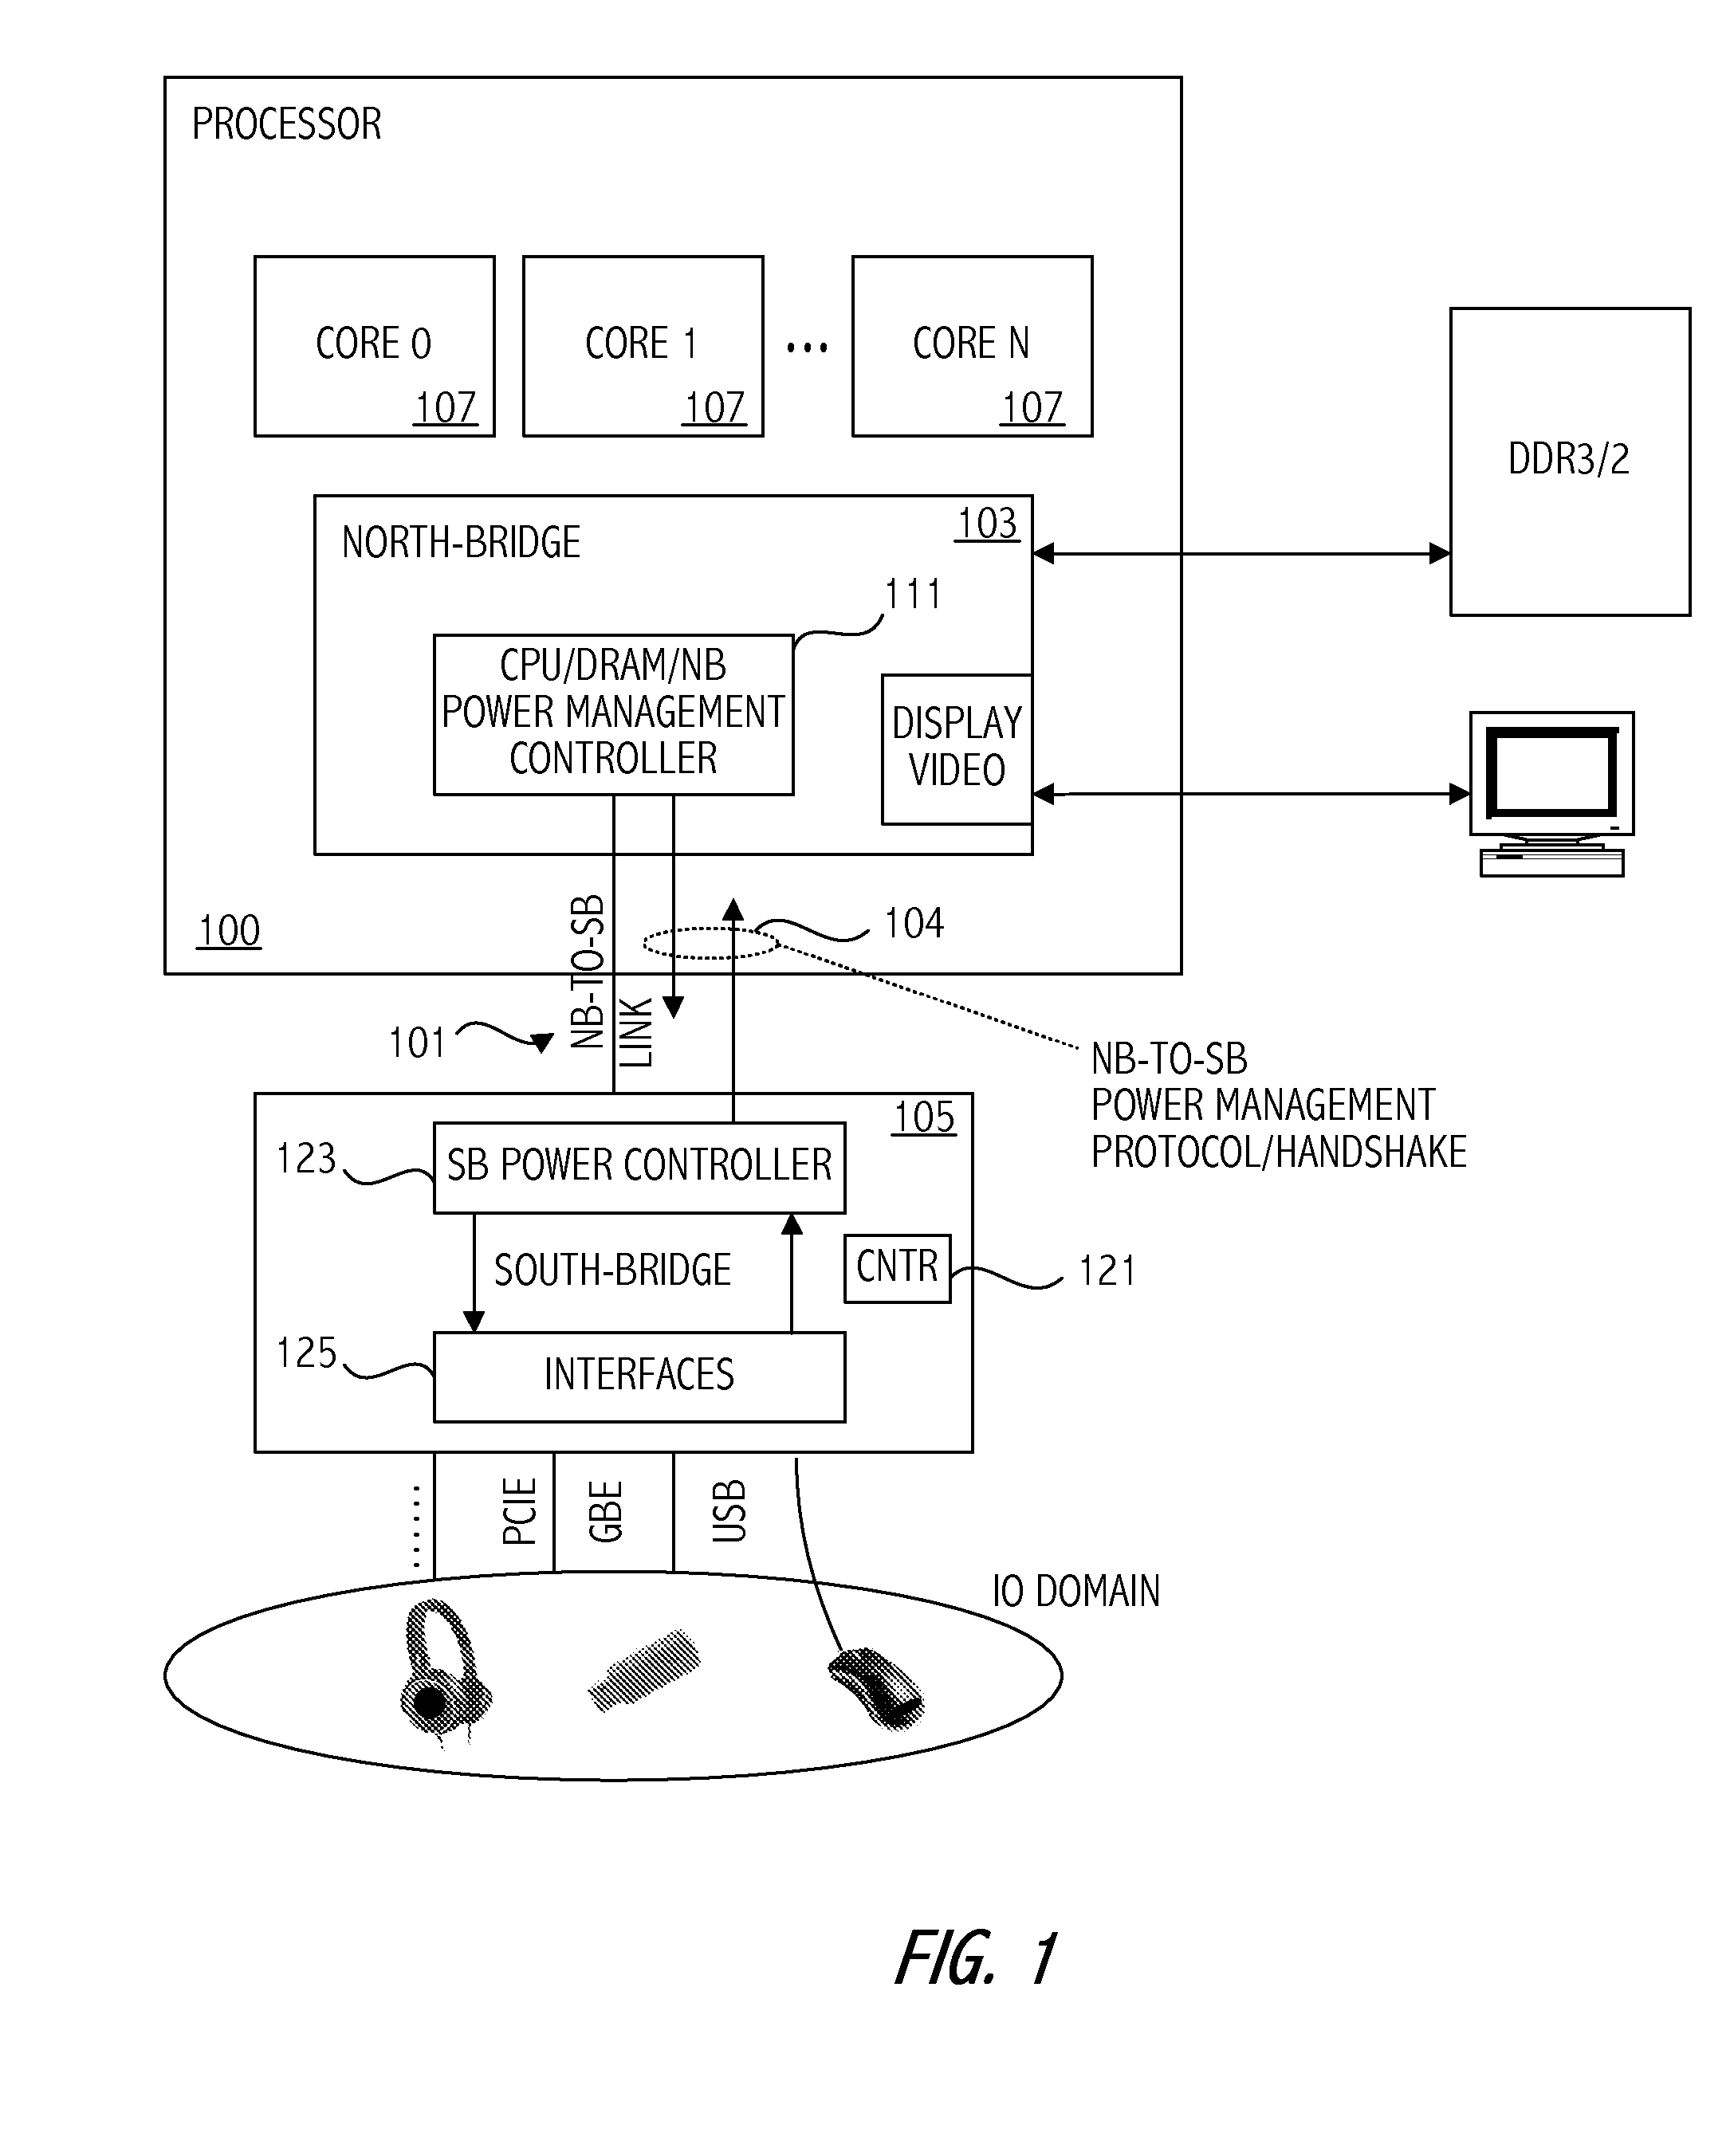 North-bridge to south-bridge protocol for placing processor in low power state